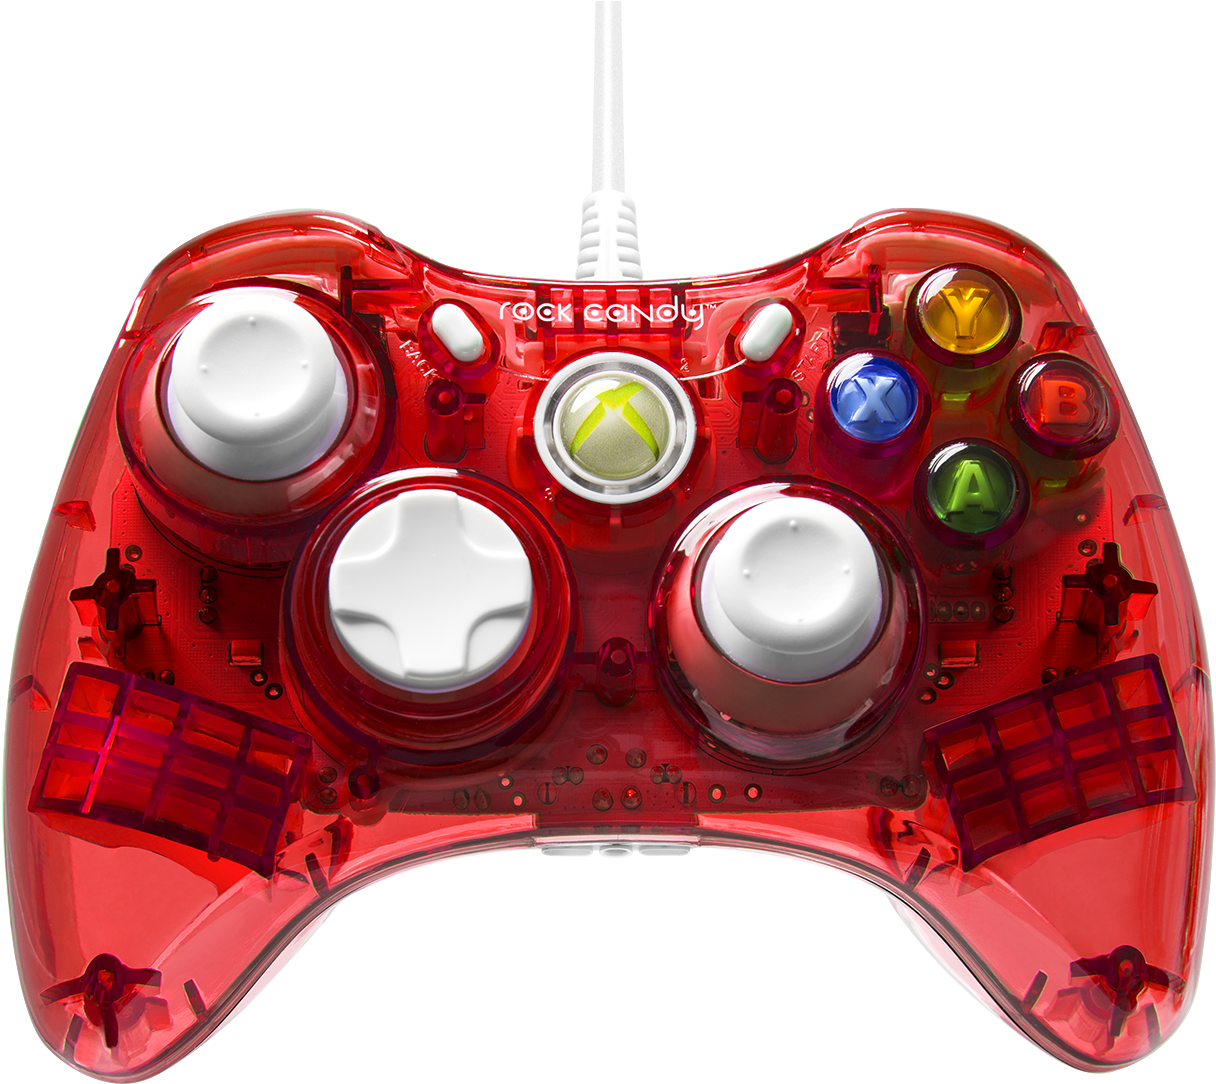 Rock Candy Stormin' Cherry - Rock Candy Xbox 360 Controller (1300x1300), Png Download